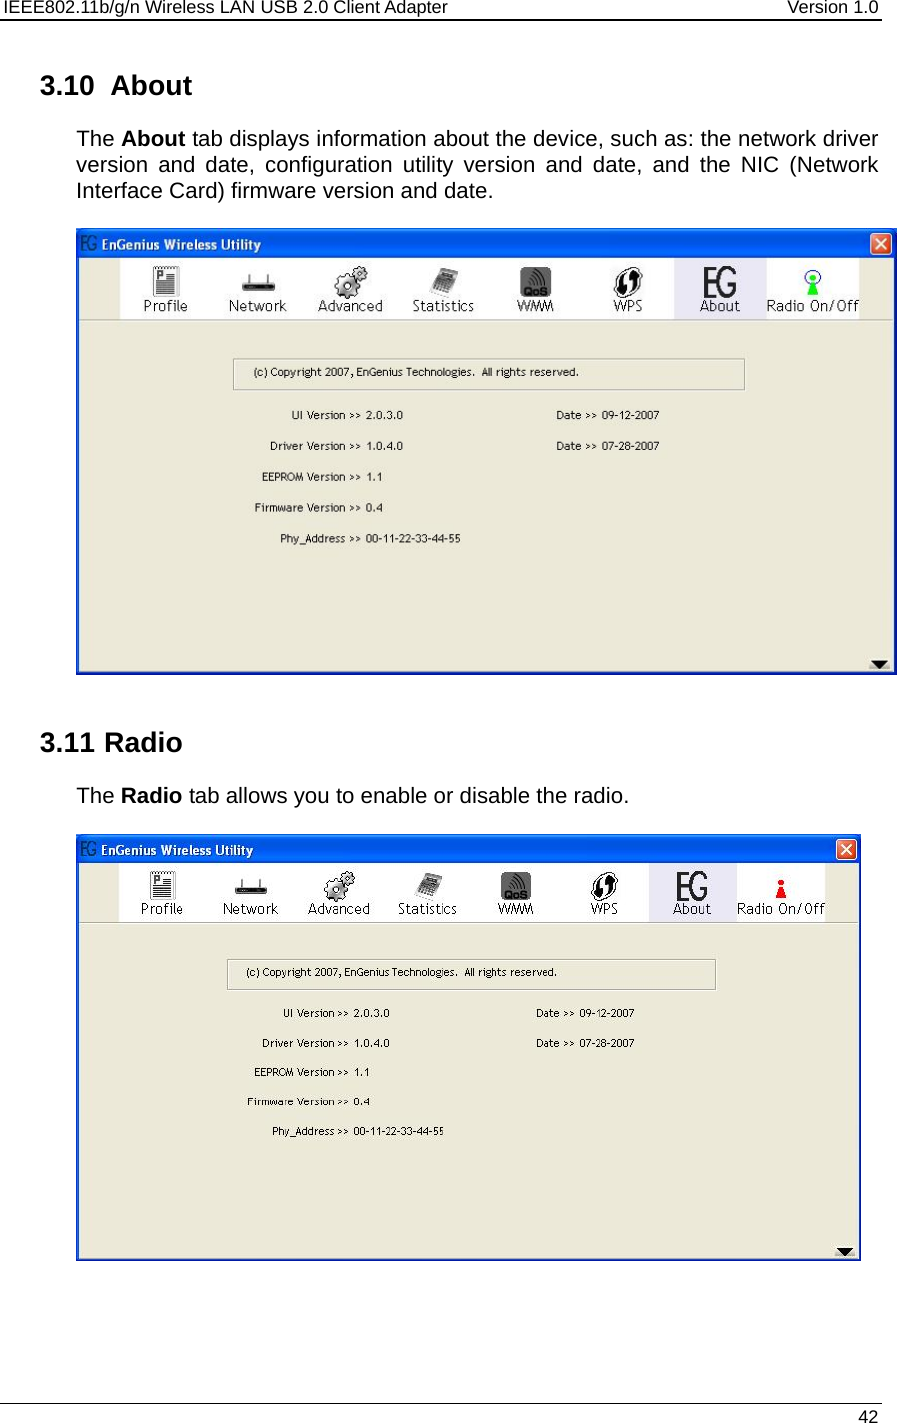 IEEE802.11b/g/n Wireless LAN USB 2.0 Client Adapter  Version 1.0   42  3.10  About The About tab displays information about the device, such as: the network driver version and date, configuration utility version and date, and the NIC (Network Interface Card) firmware version and date.       3.11   Radio The Radio tab allows you to enable or disable the radio.     